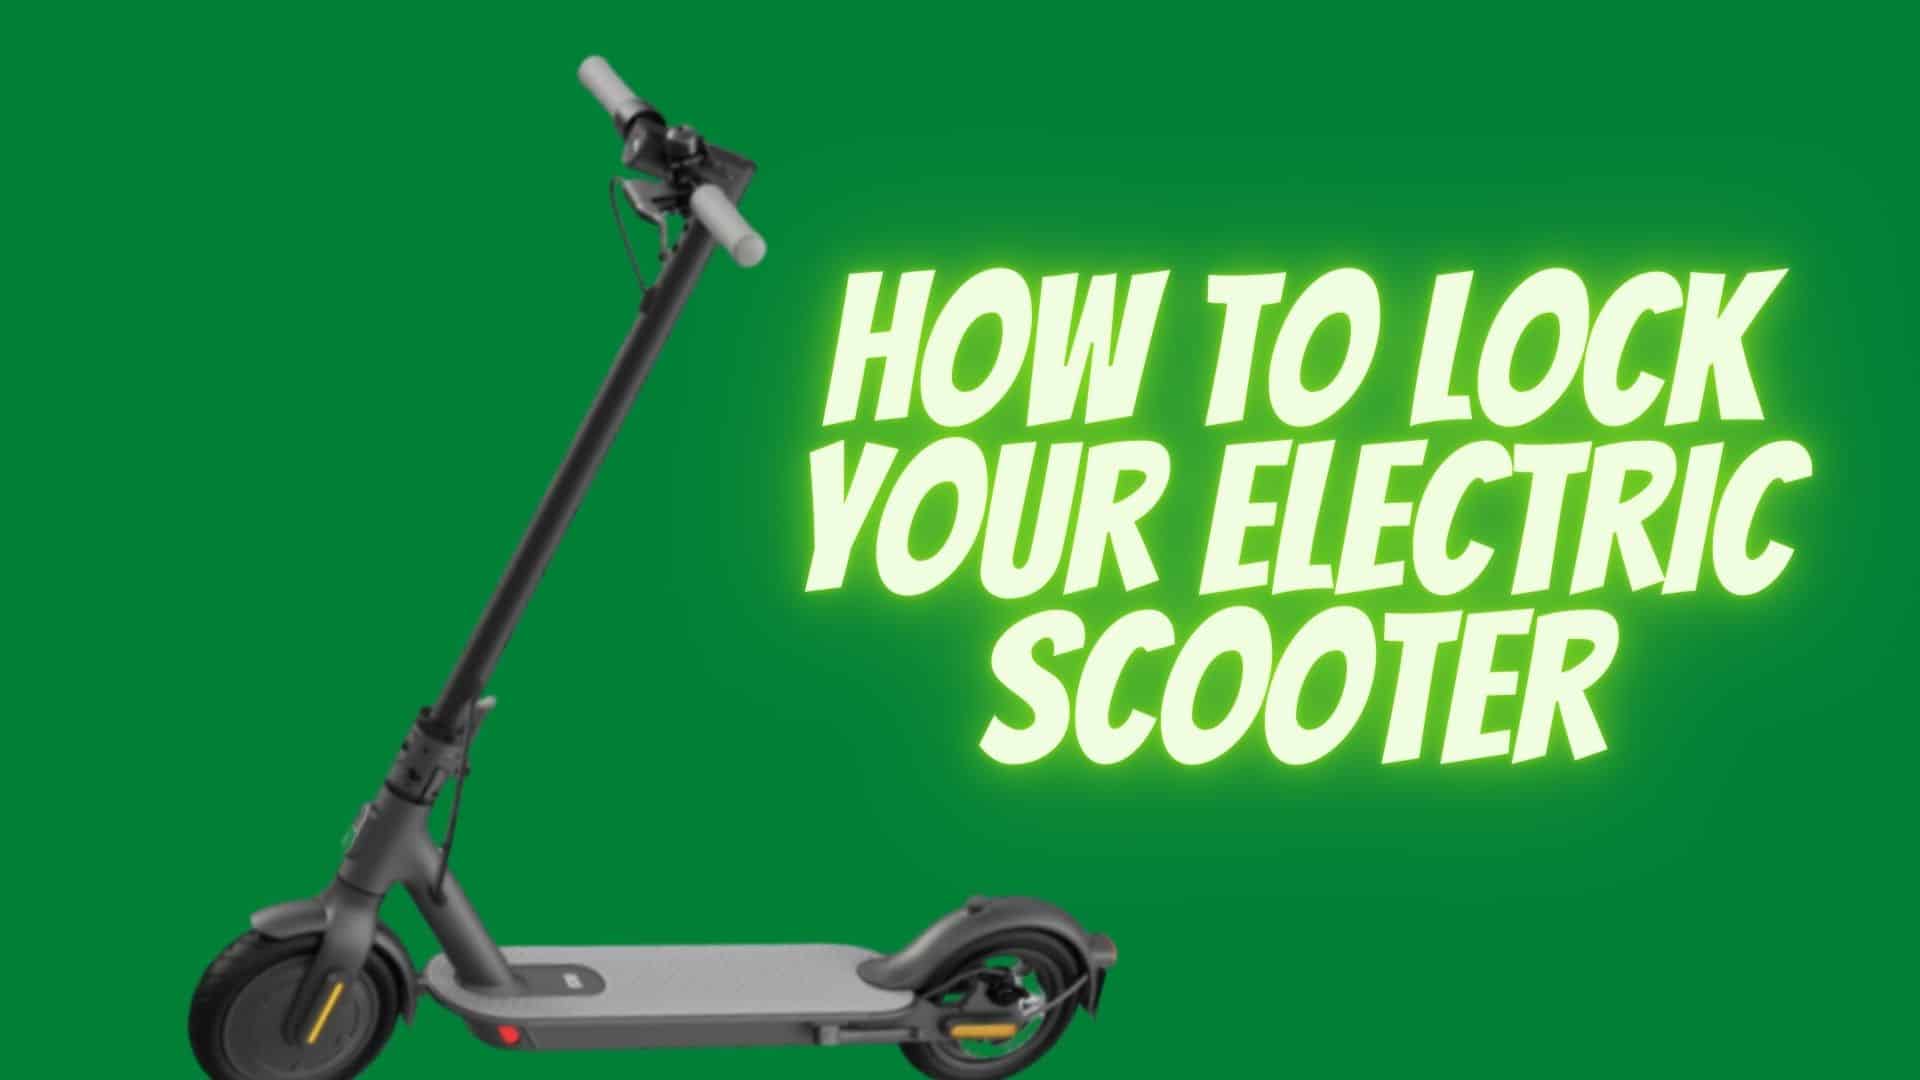 How to lock your electric scooter? Check Our Suggestions